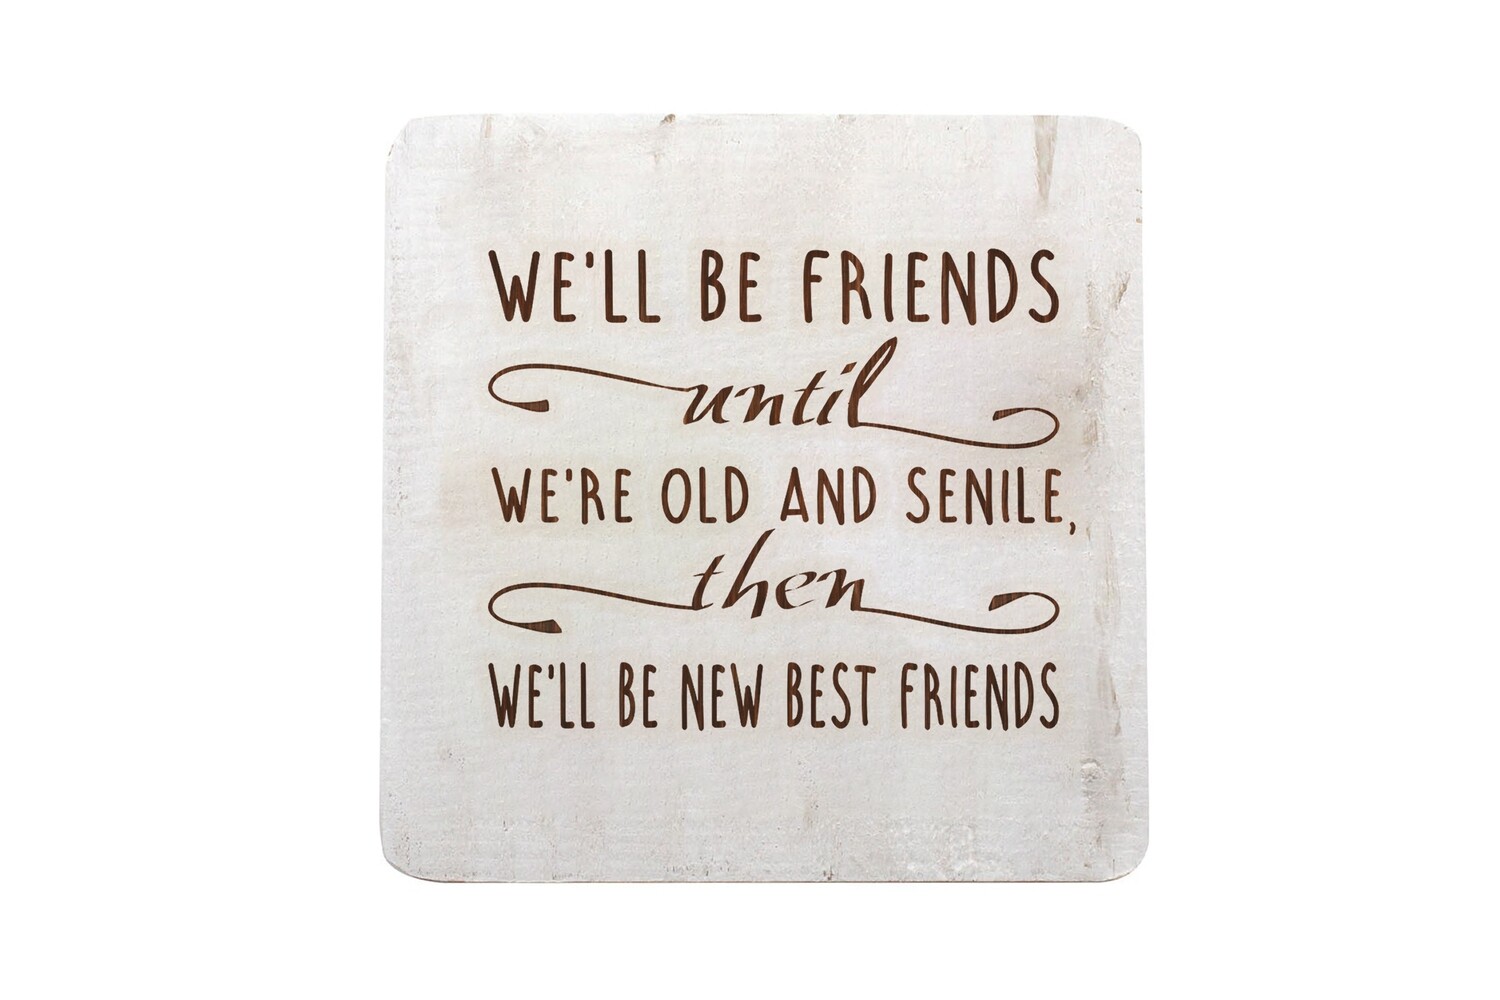 We'll Be Friends until We're Old and Senile, then We'll be New Best Friends Hand-Painted Wood Coaster Set